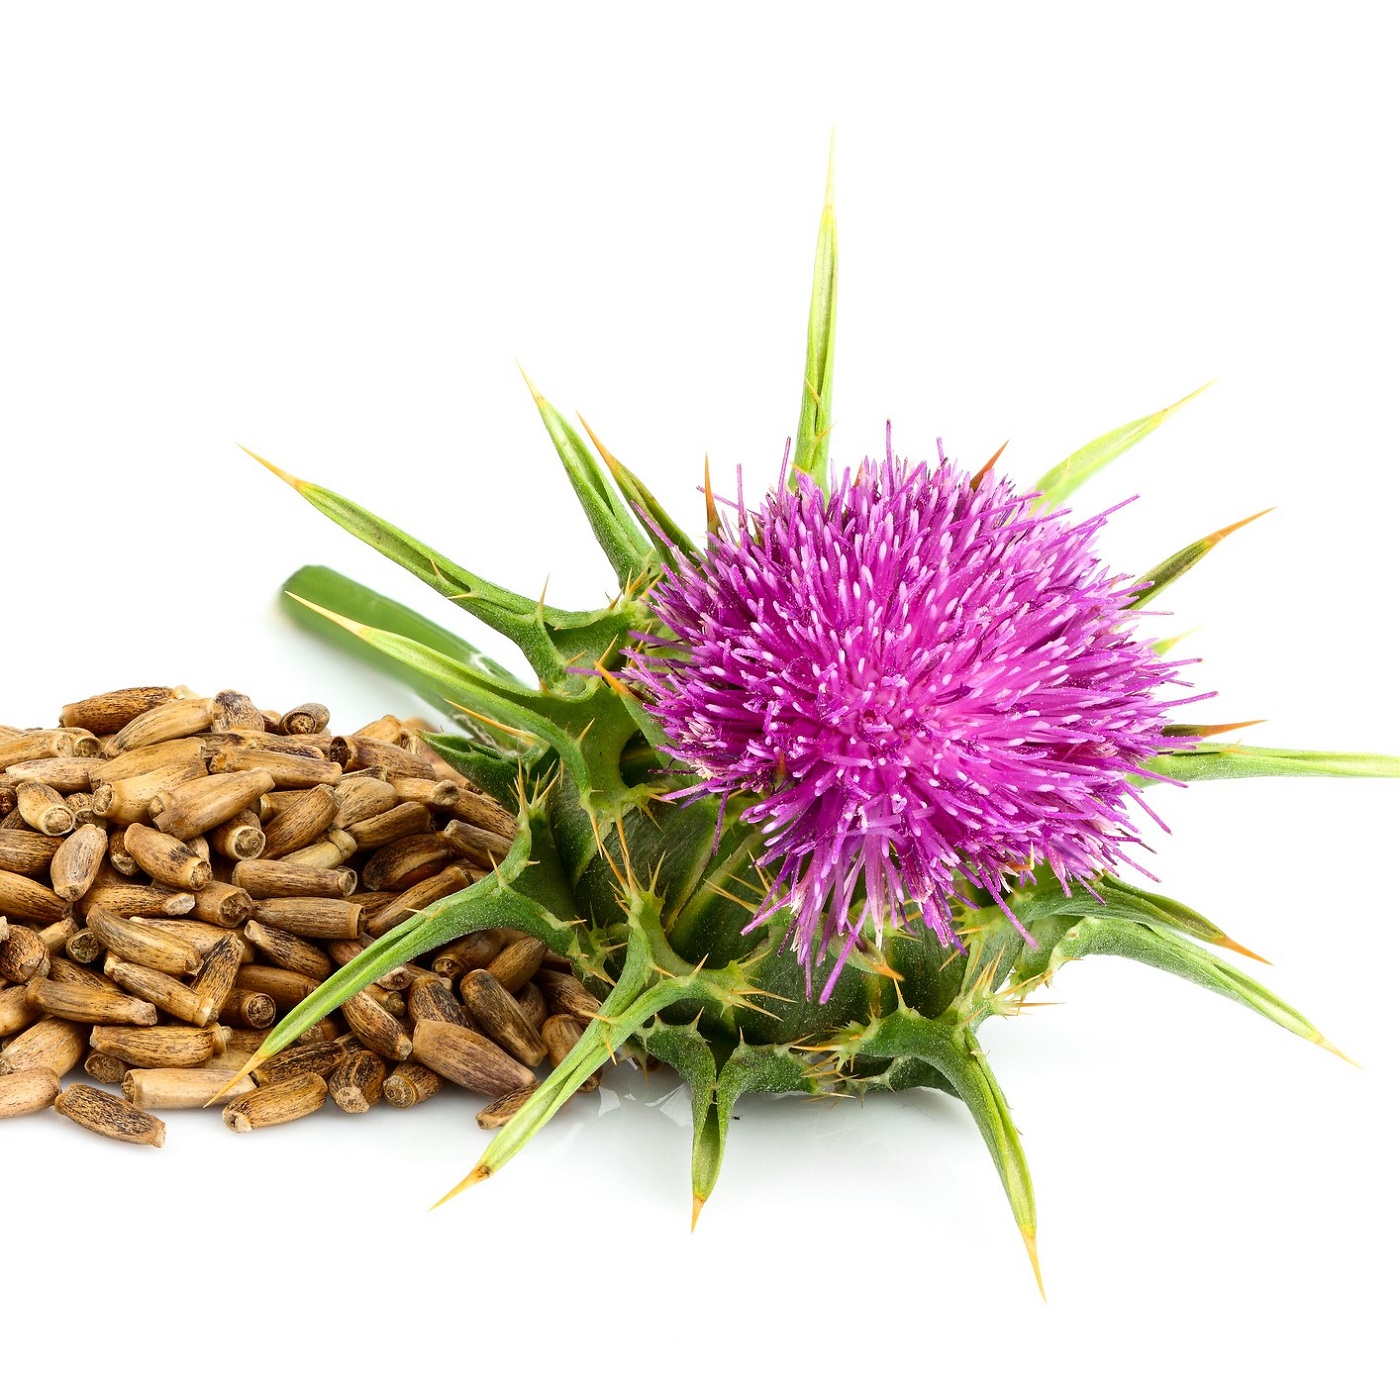 Five handy uses for milk thistle seeds